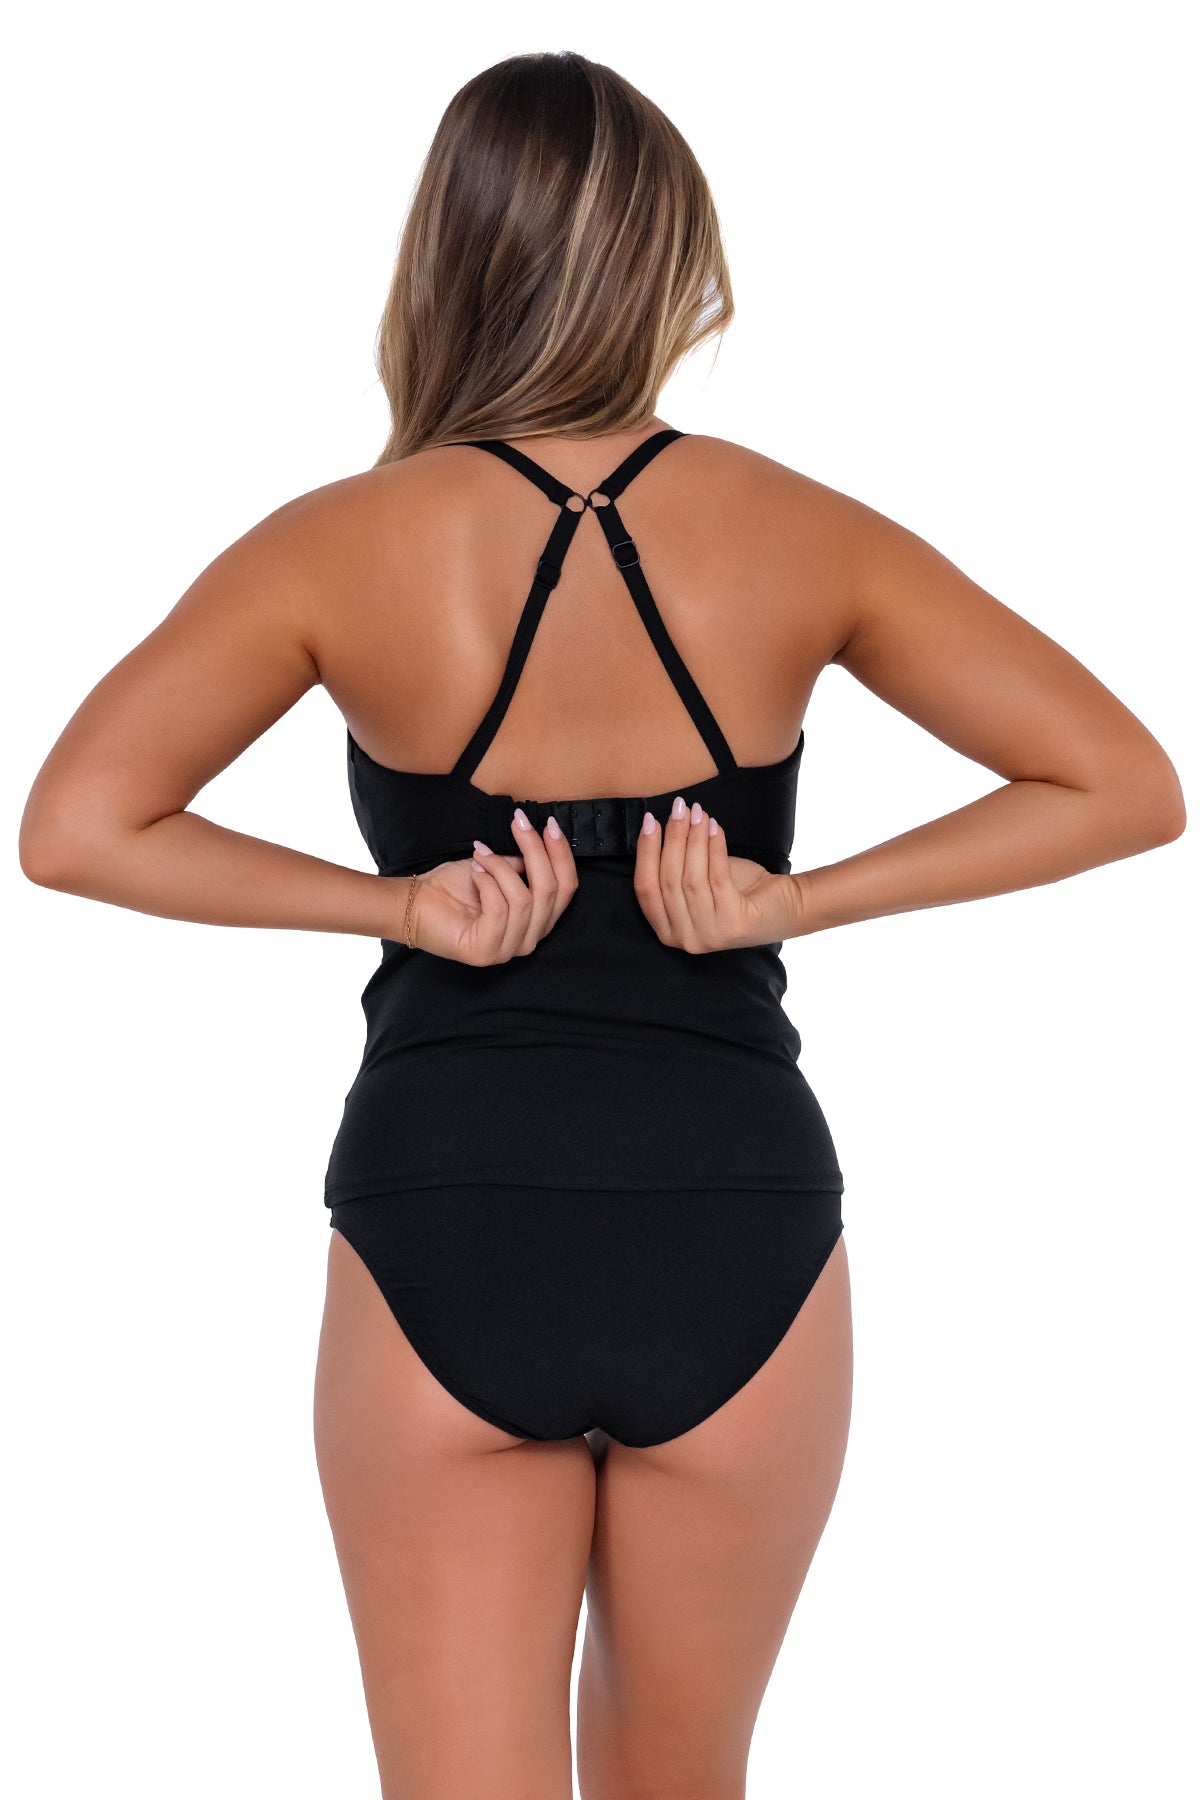 Back pose #1 of Taylor wearing Sunsets Black Zuri V-Wire Tankini Top showing hidden hook-and-eye closure with matching High Road Bottom bikini